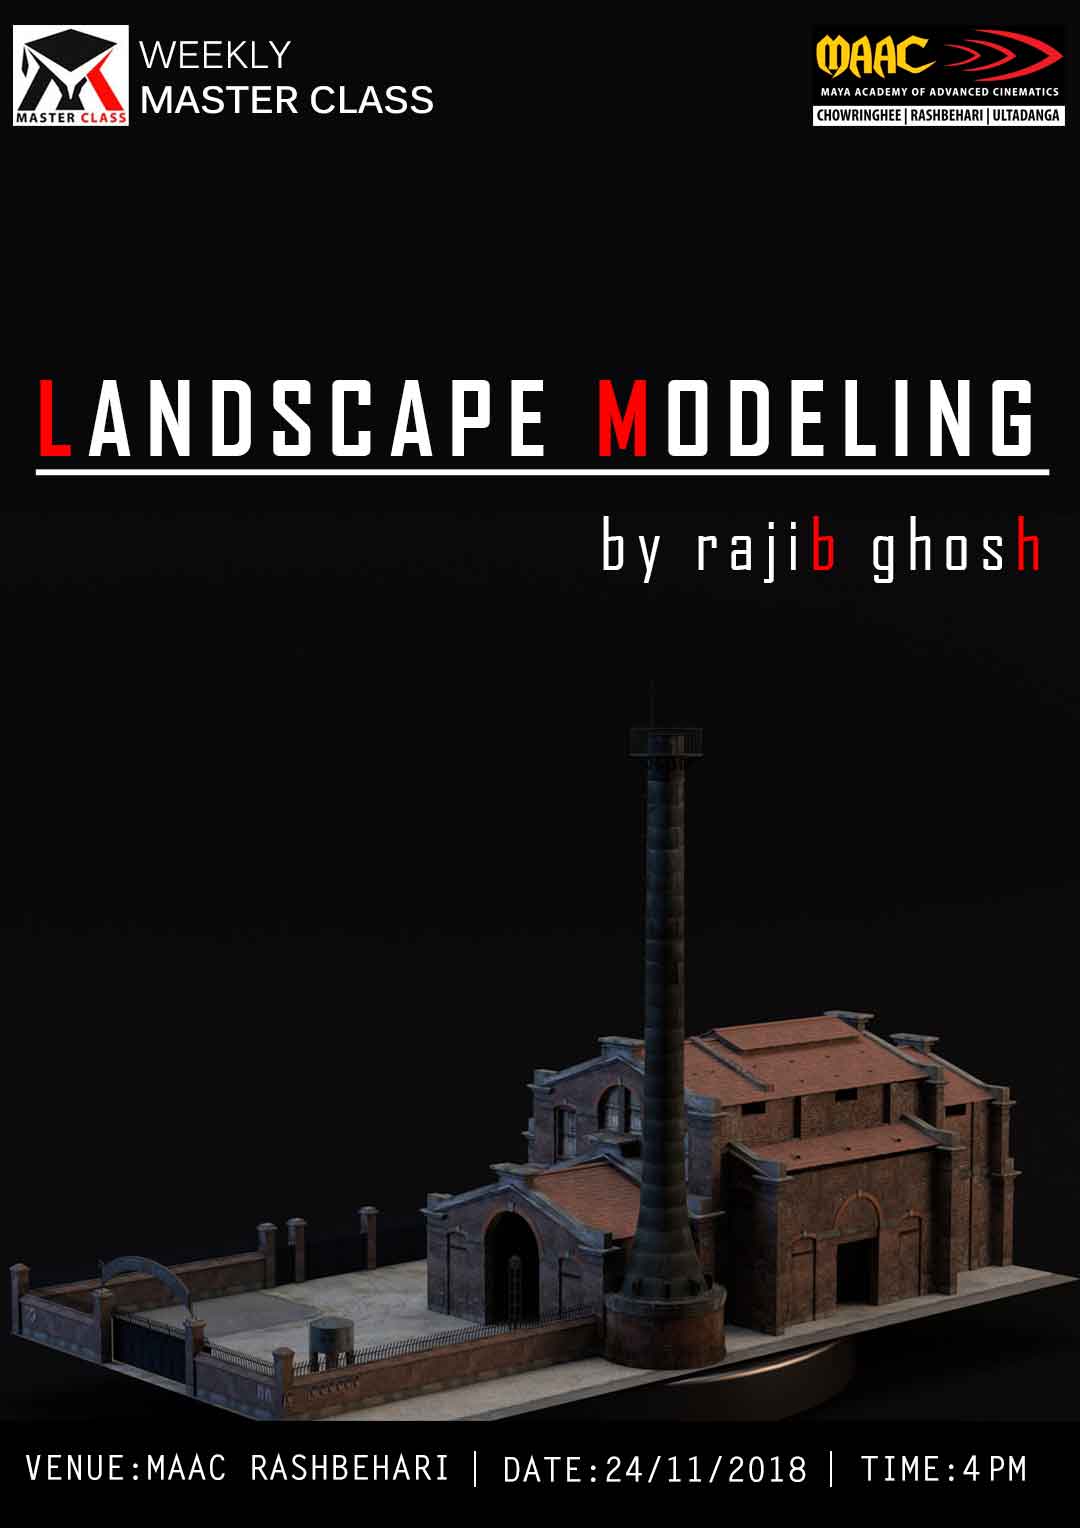 Weekly Master Class on landscape Modeling